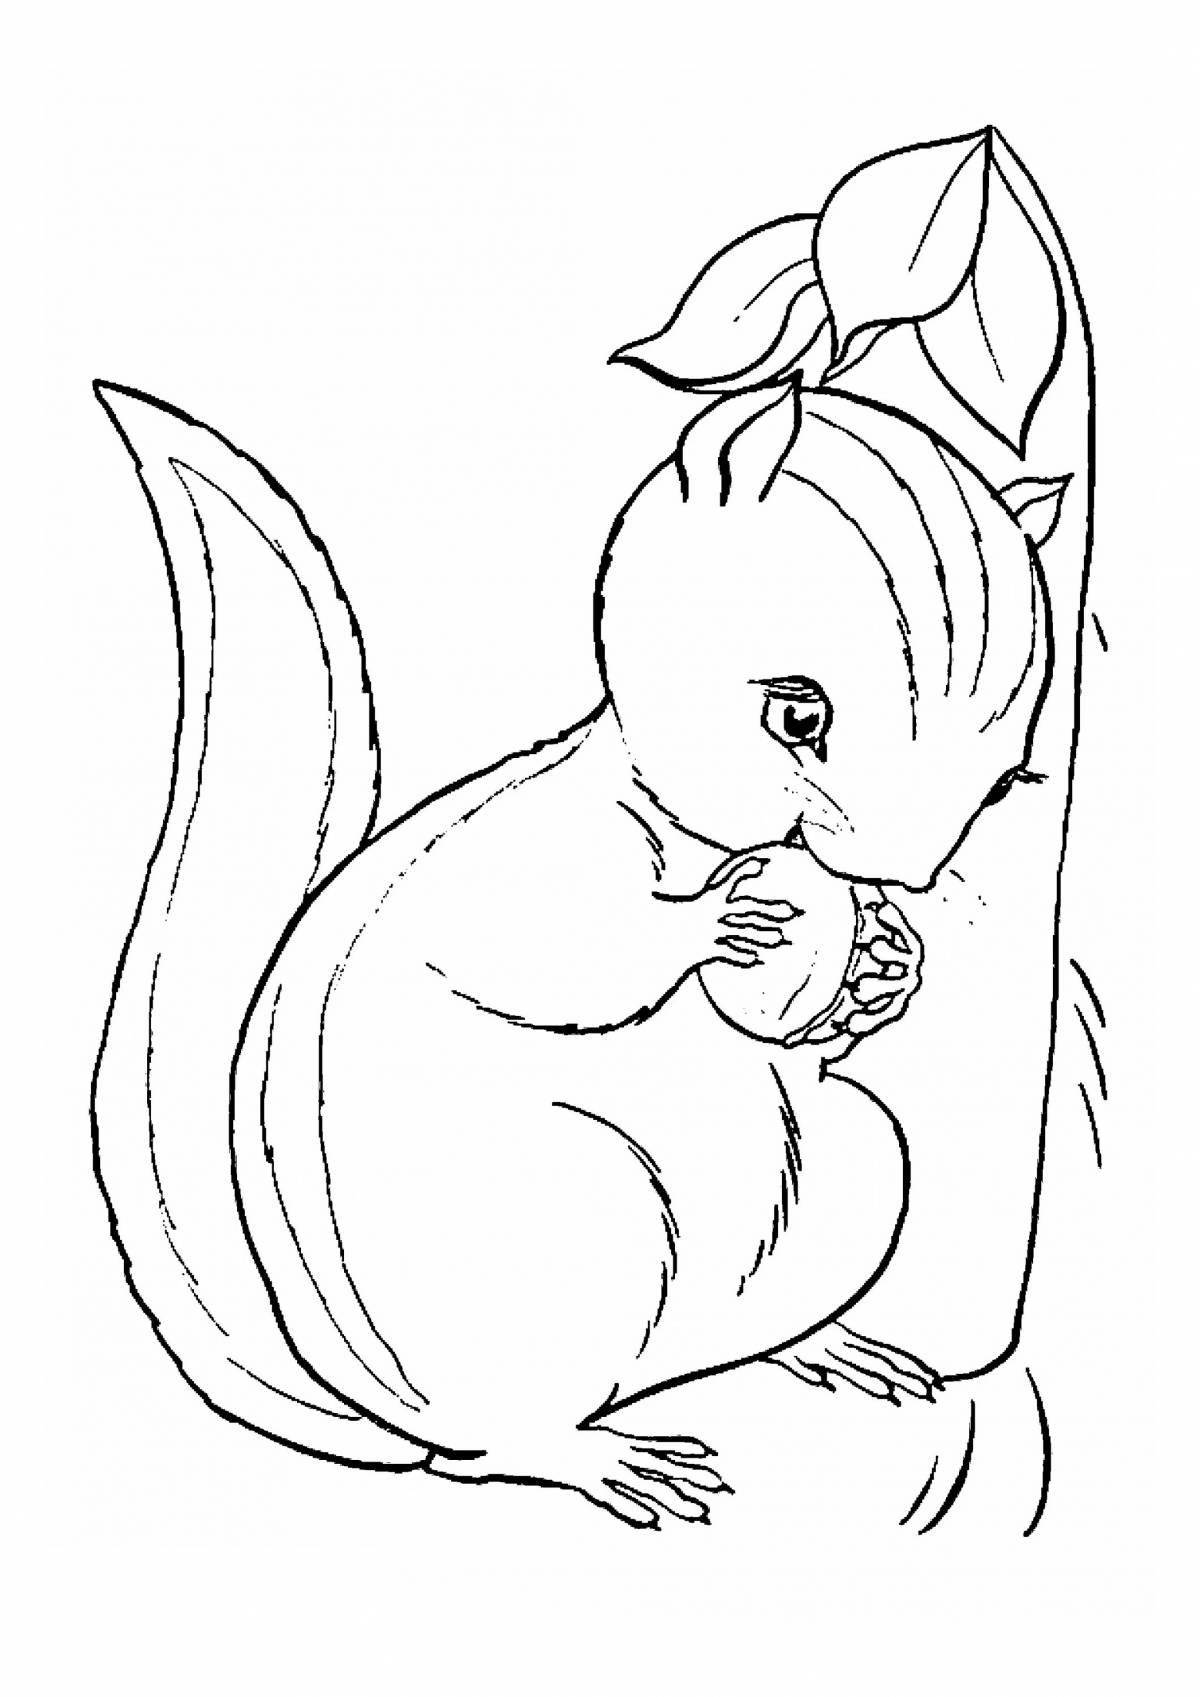 Adorable squirrel drawing for kids